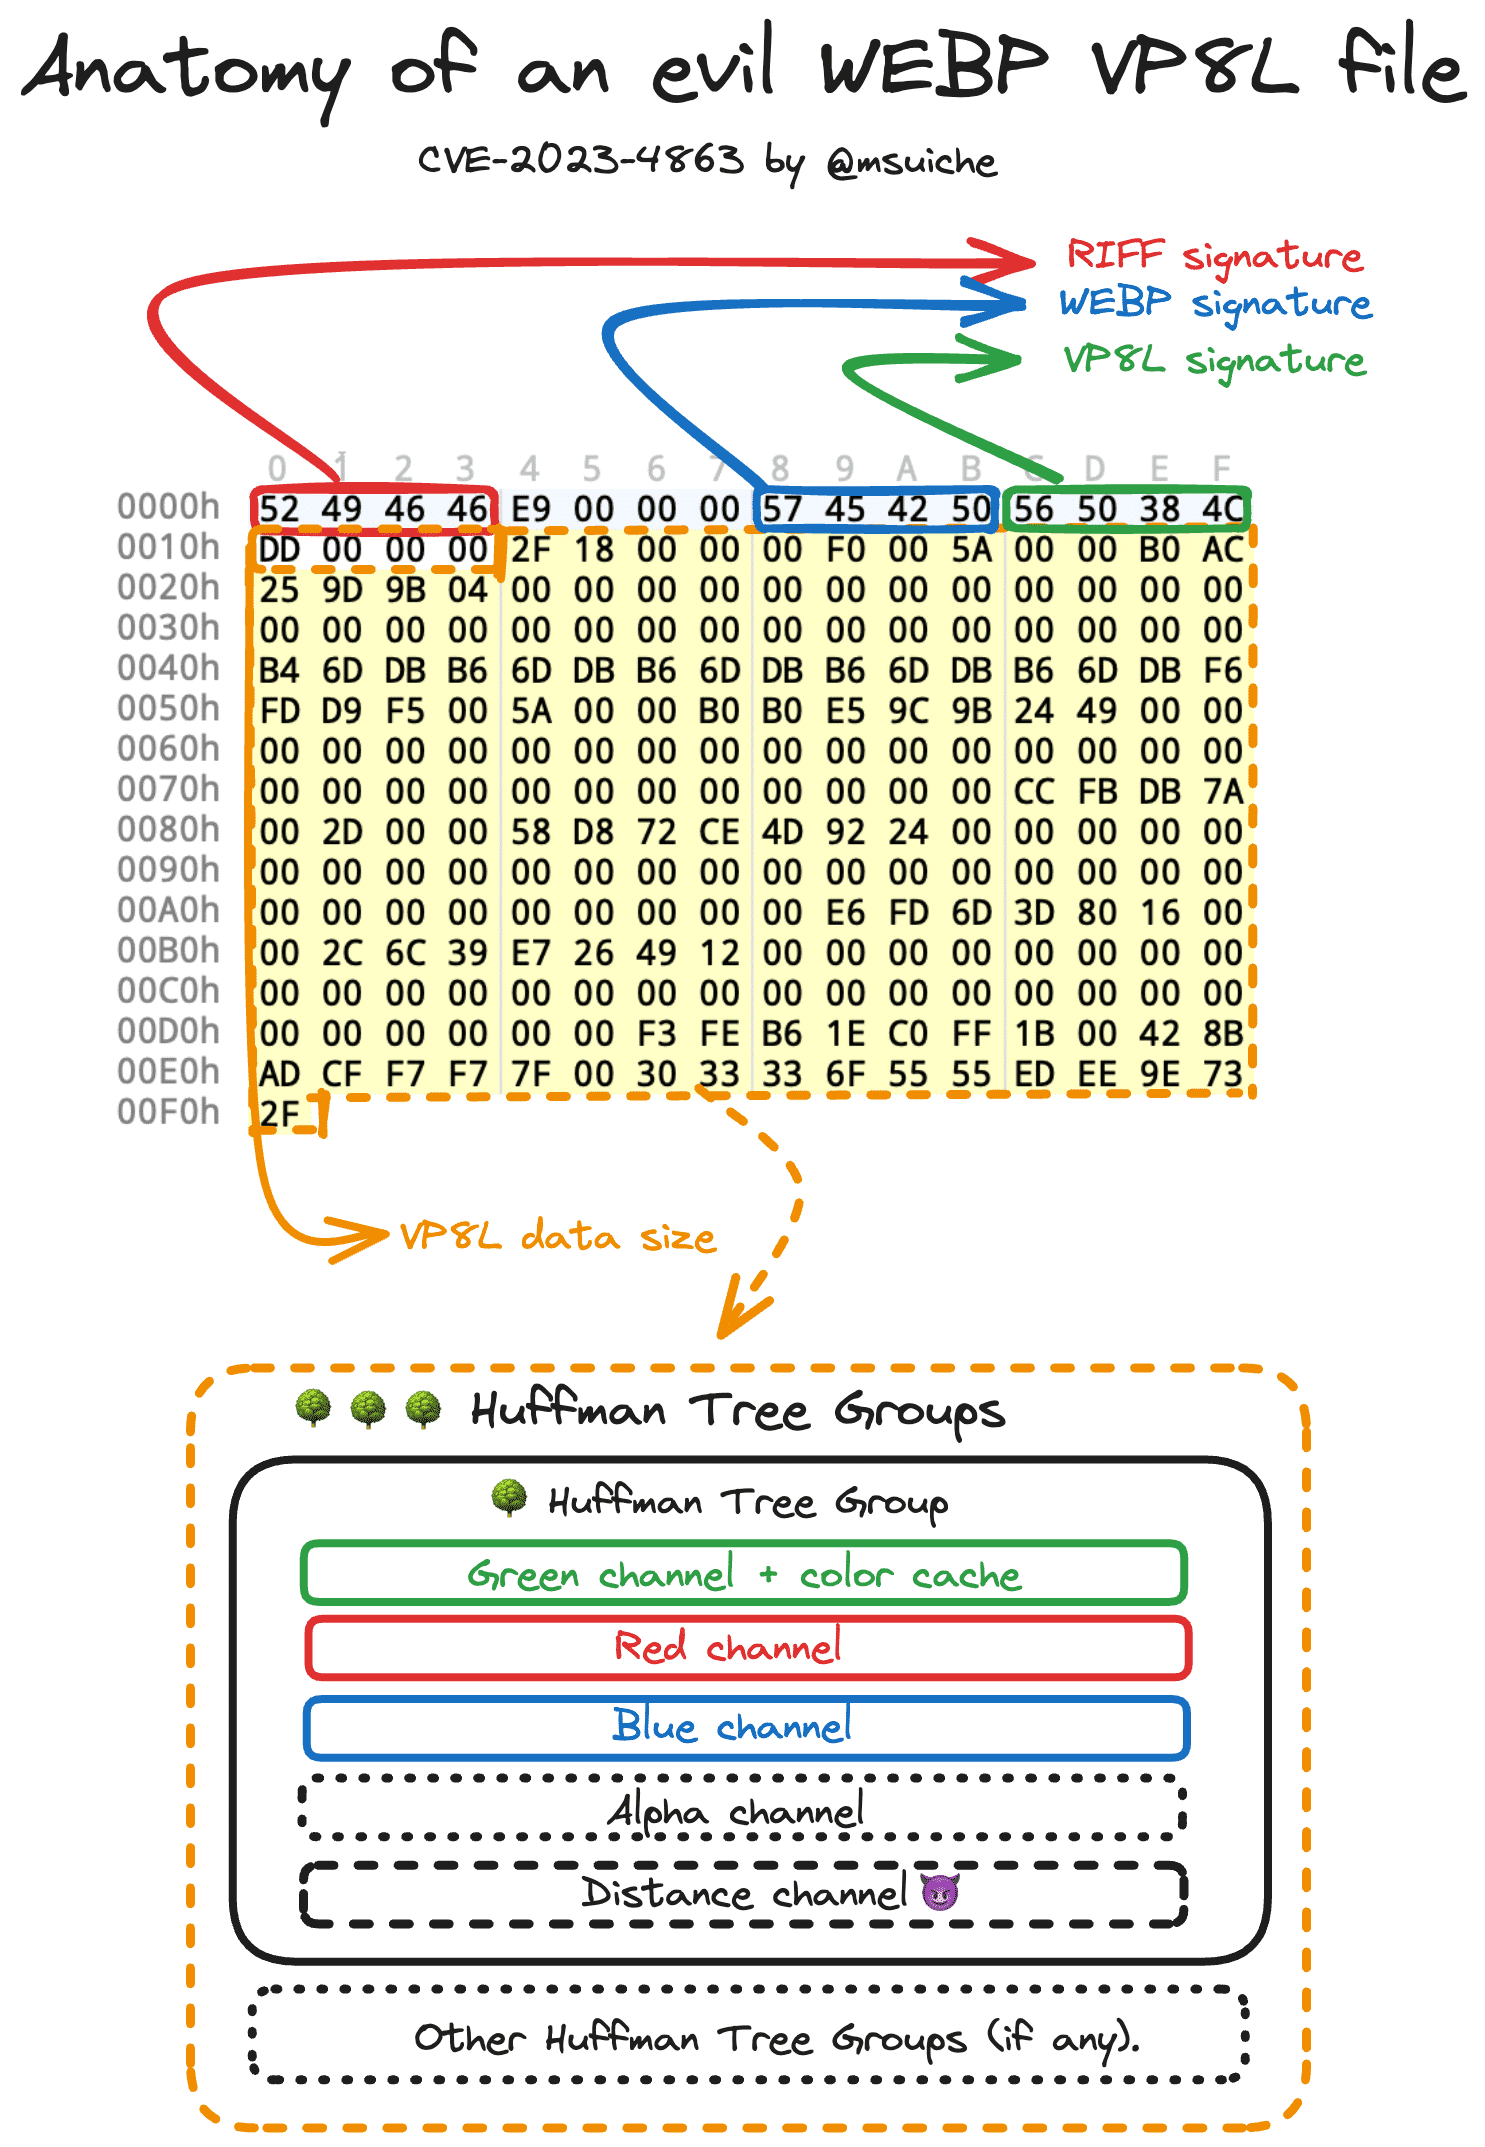 A diagram showing the anatomy of a WebP VP8L file containing the BLASTPASS Exploit.